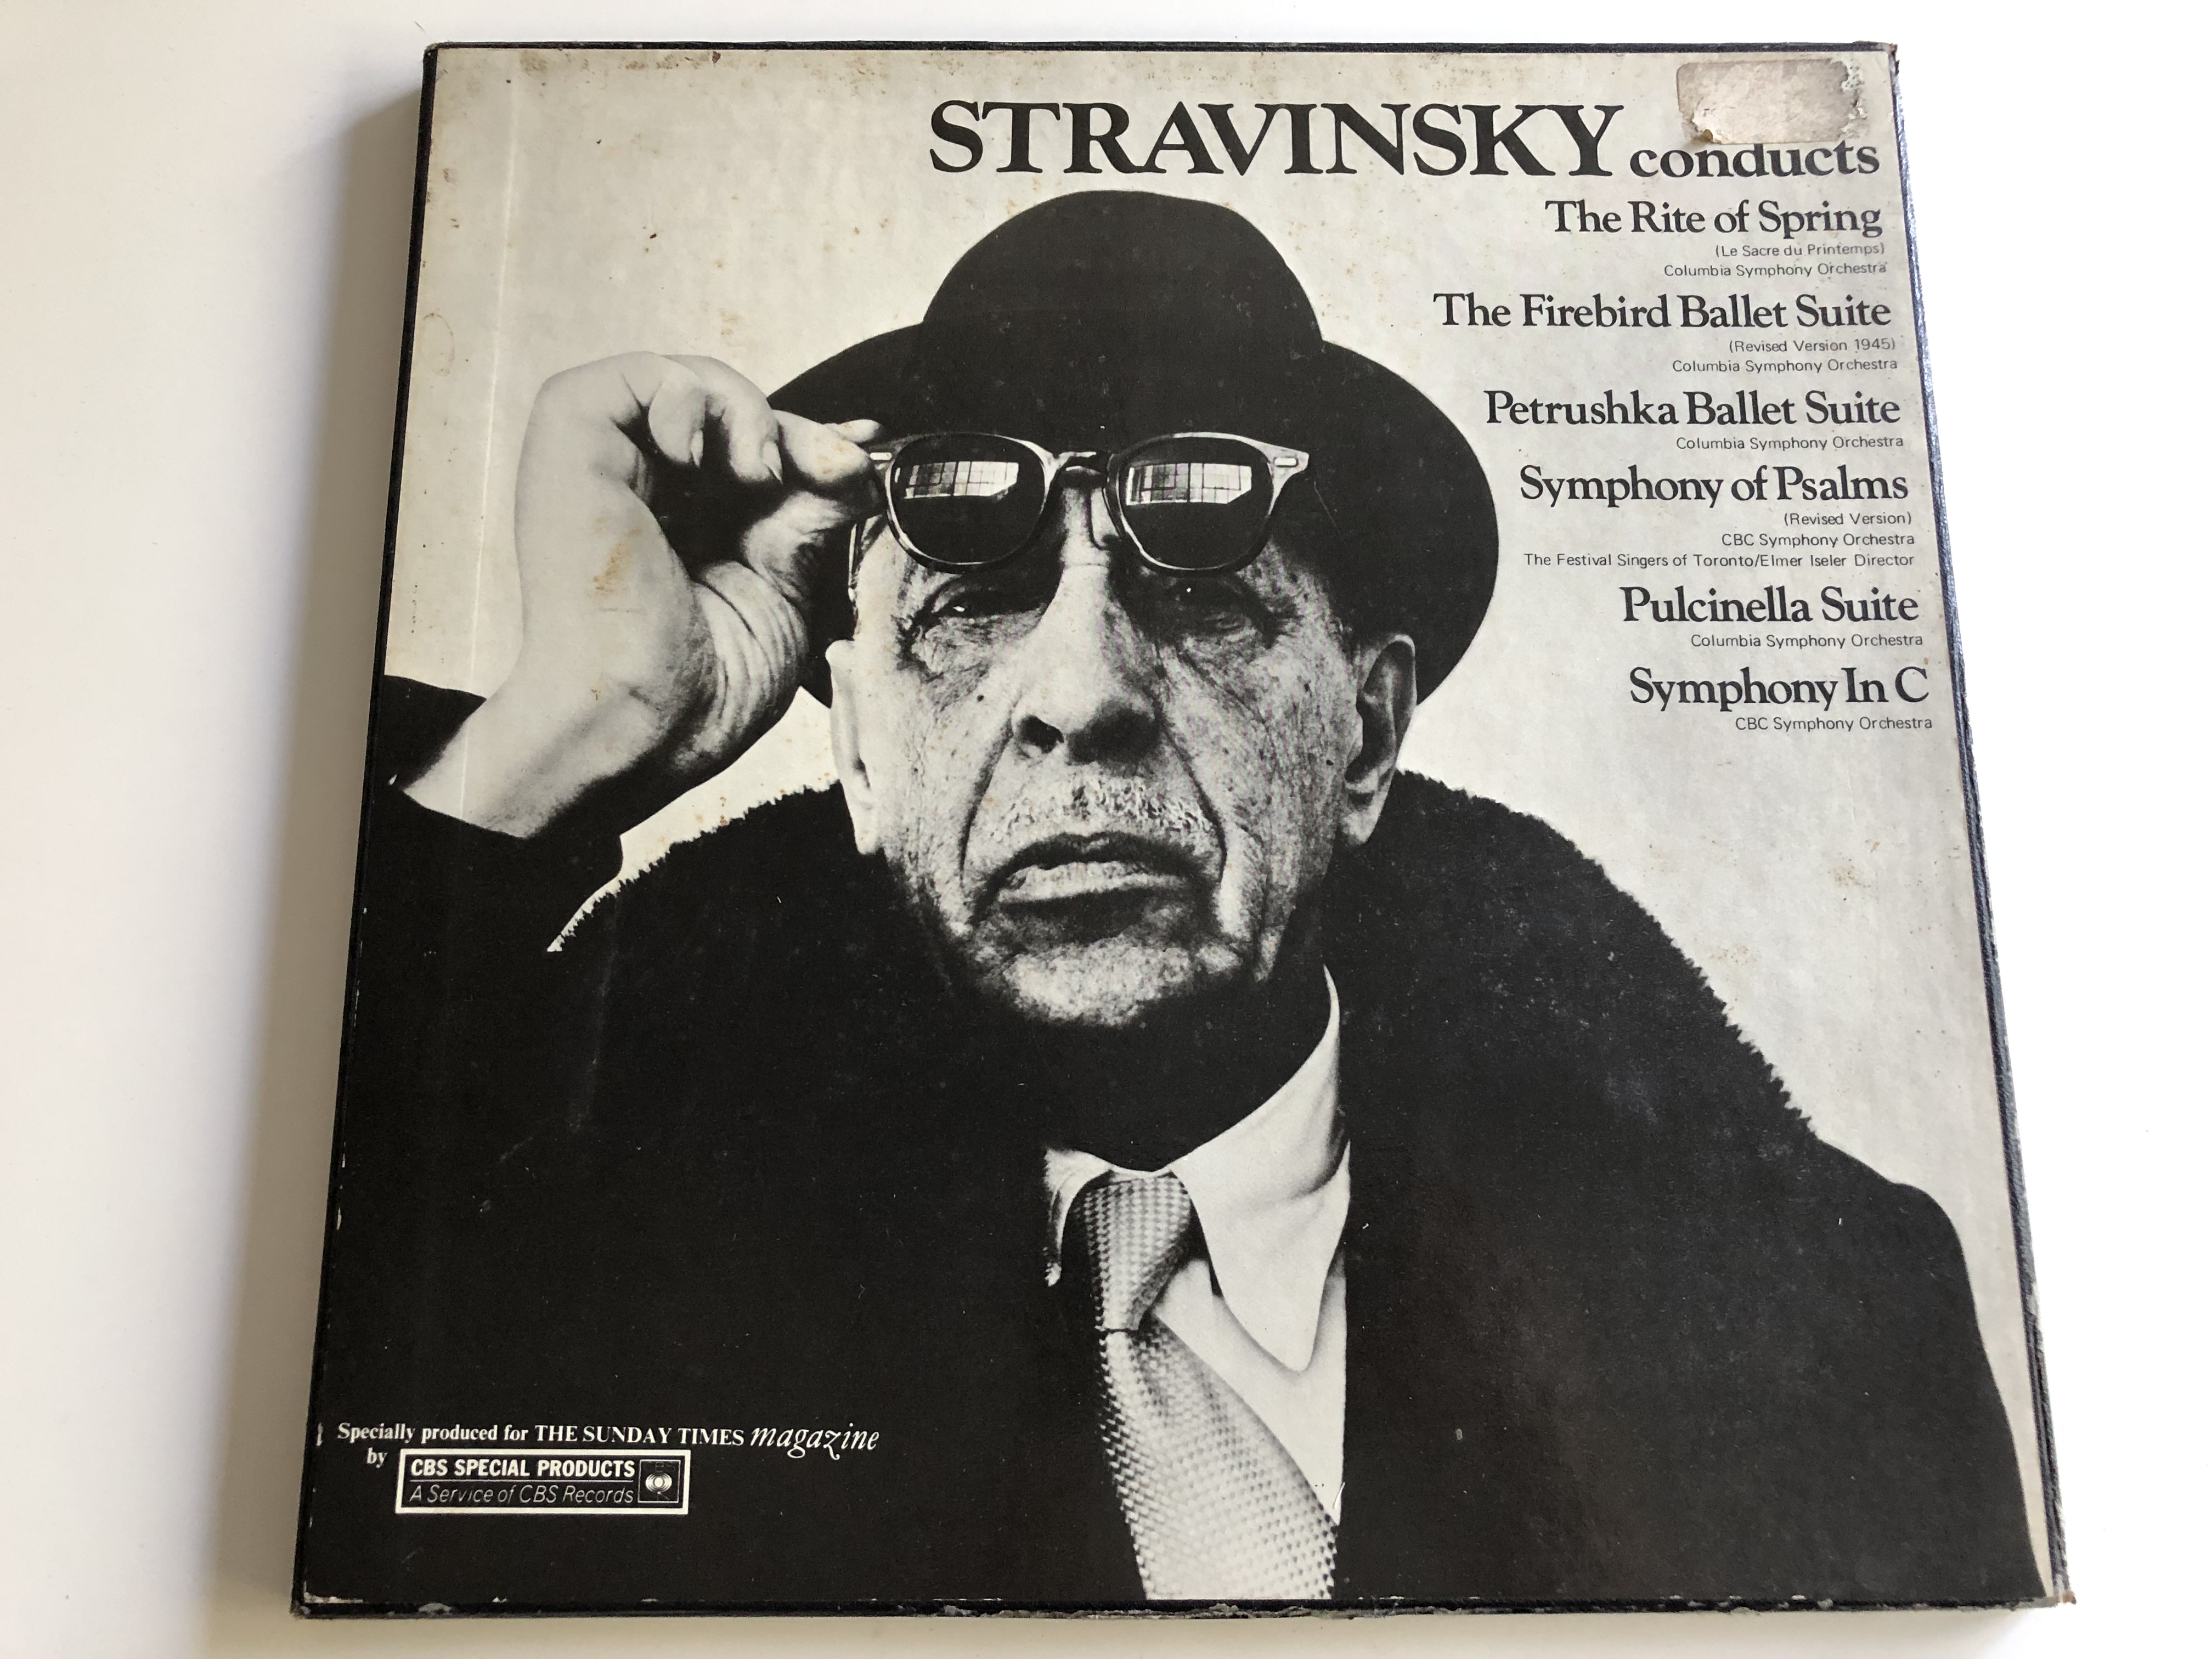 stravinsky-conducts-columbia-symphony-orchestra-cbc-symphony-orchestra-the-festival-singers-of-toronto-cbs-2x-lp-wm-39-1-.jpg